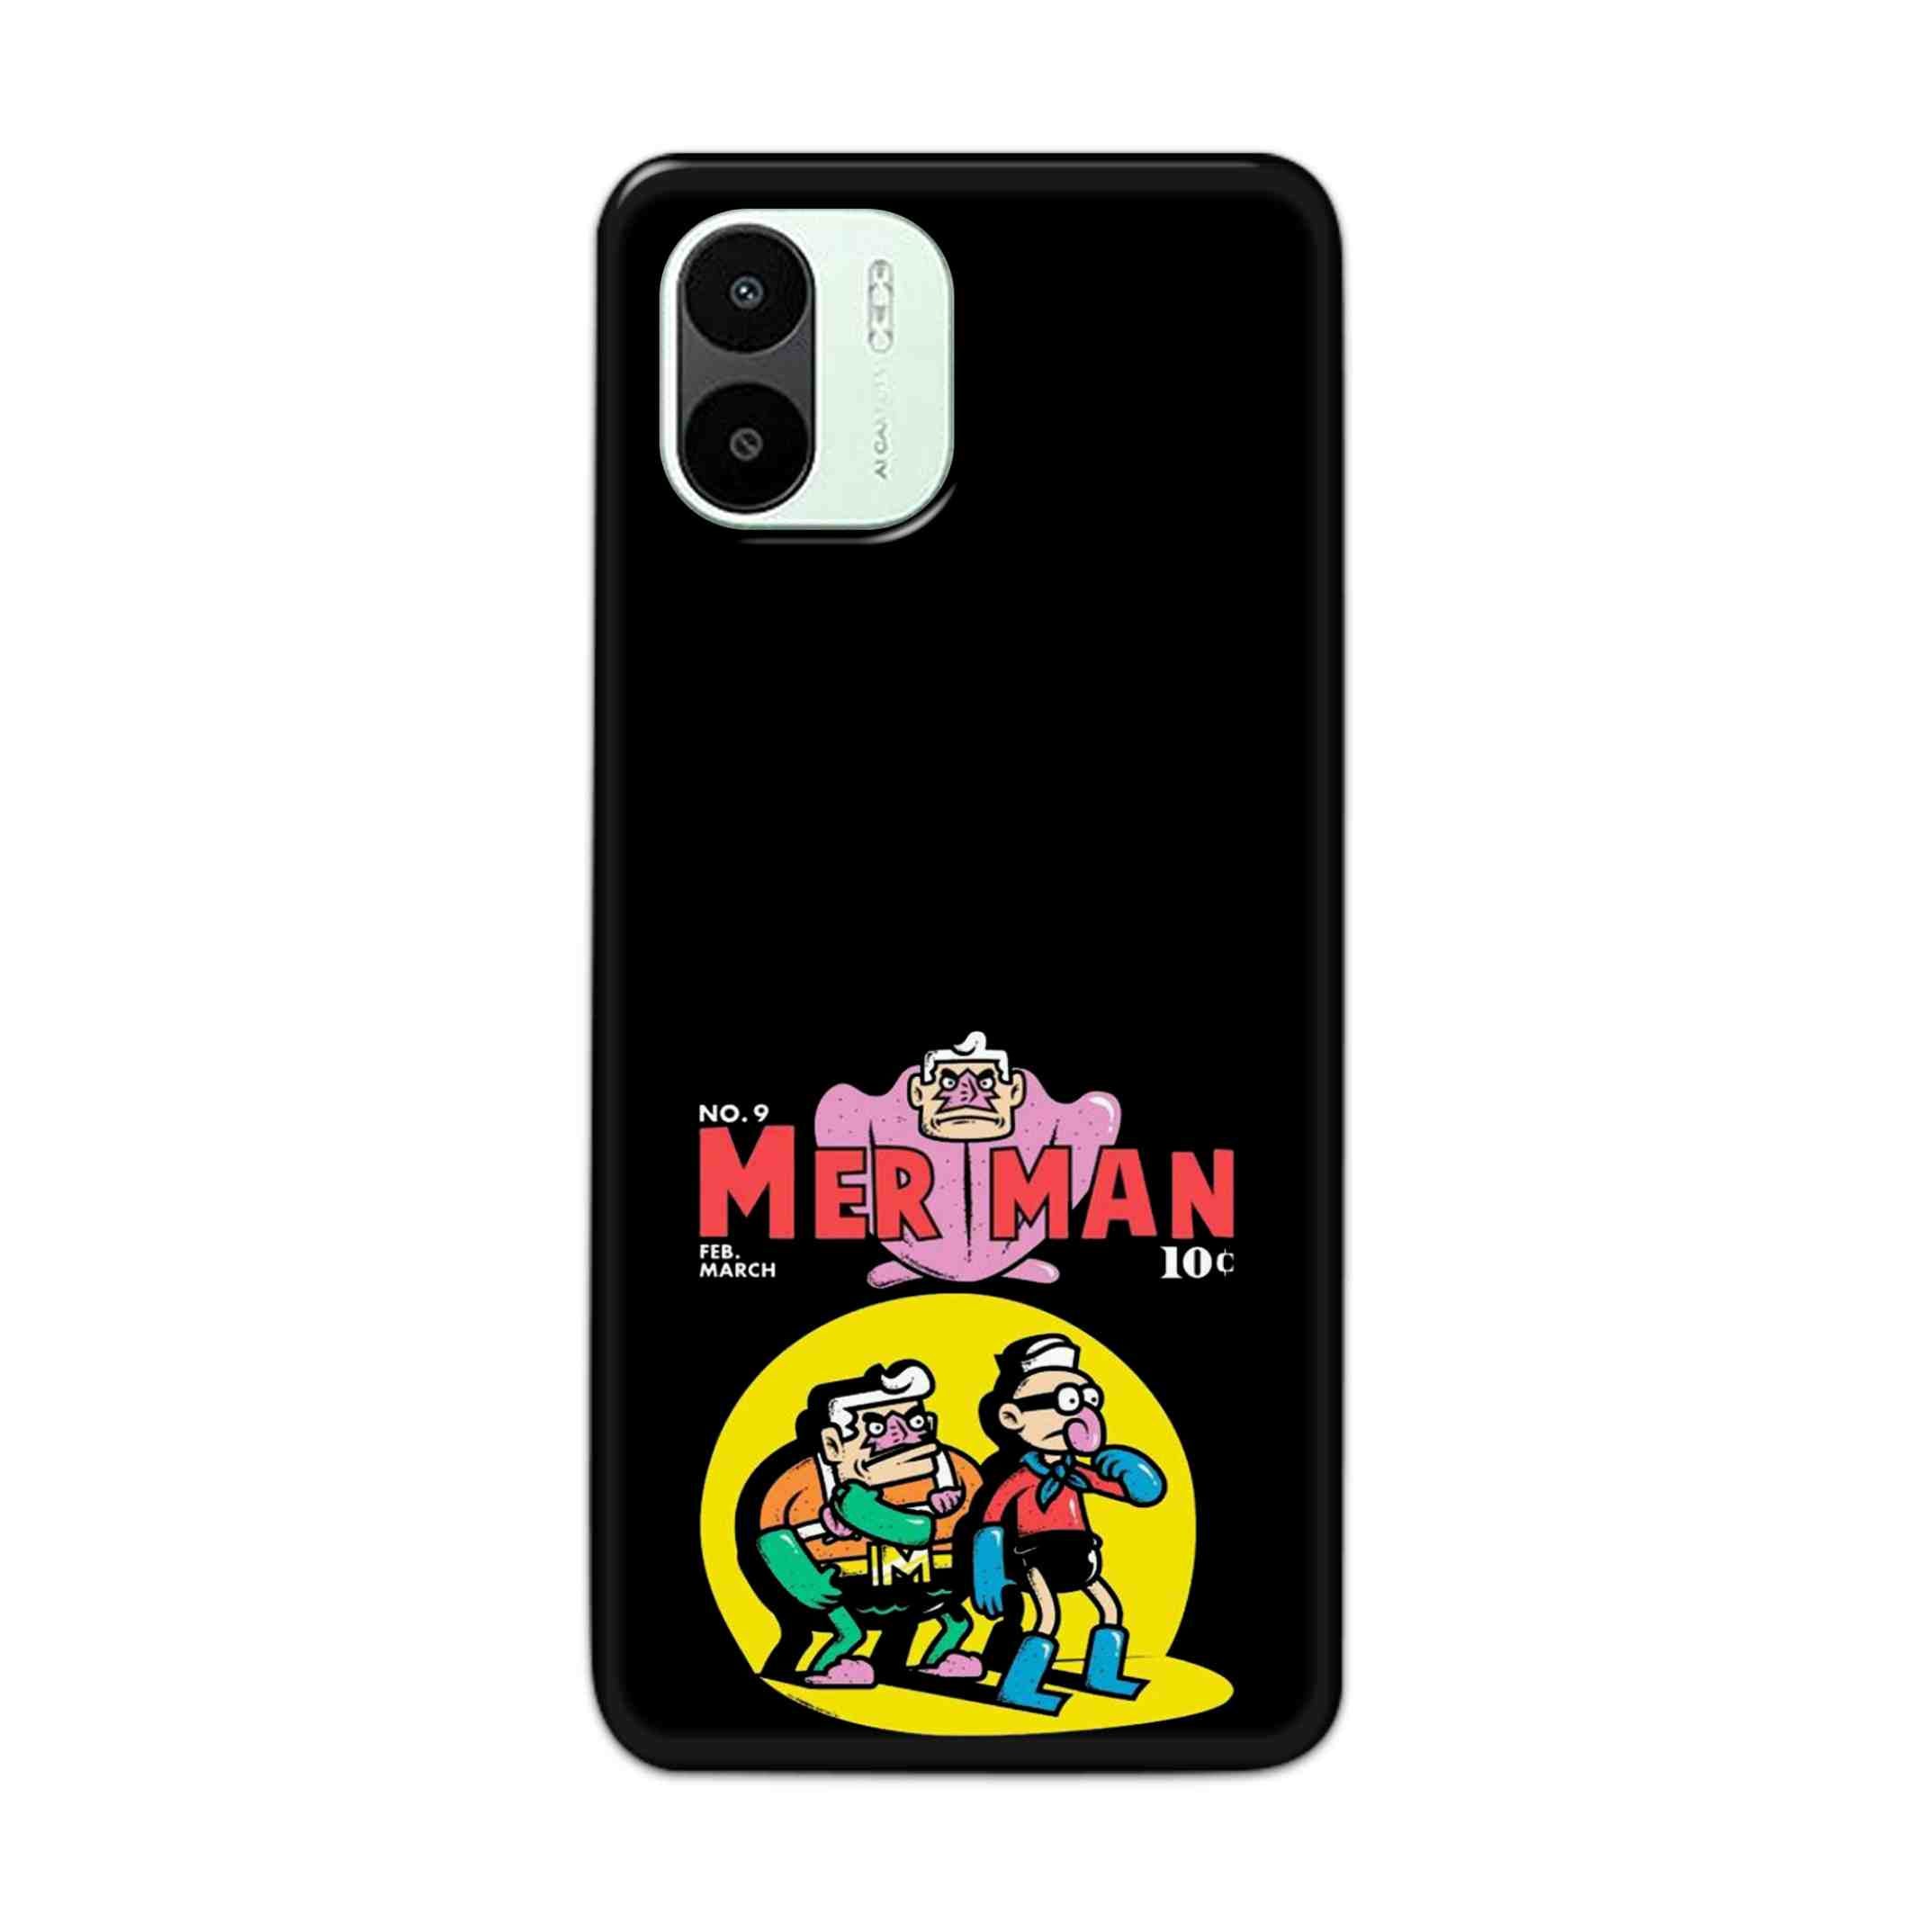 Buy Merman Hard Back Mobile Phone Case Cover For Xiaomi Redmi A1 5G Online